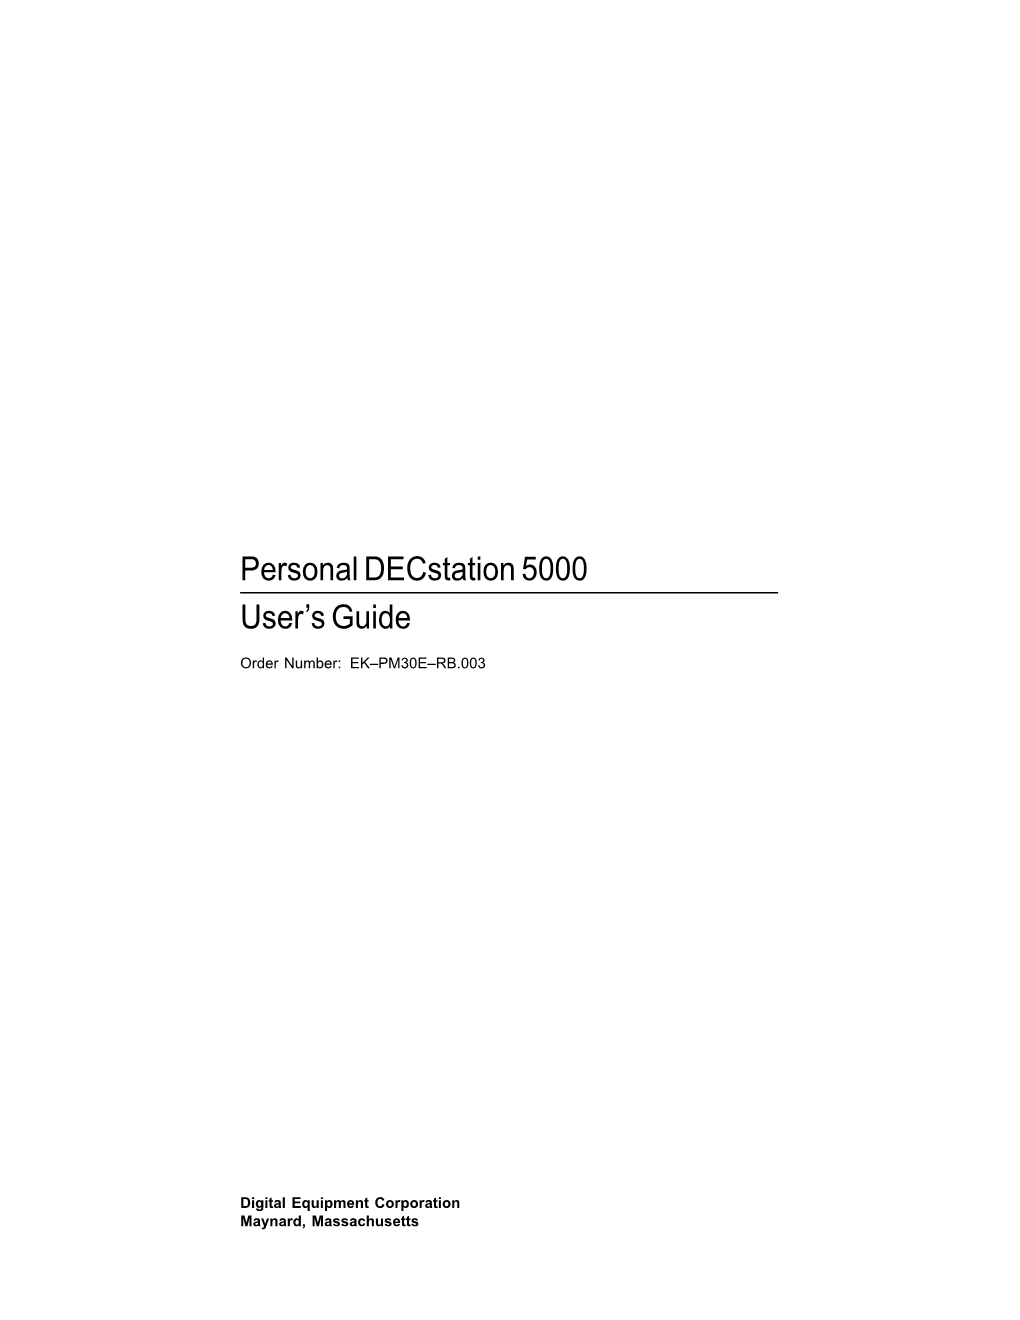 Personal Decstation 5000 User's Guide